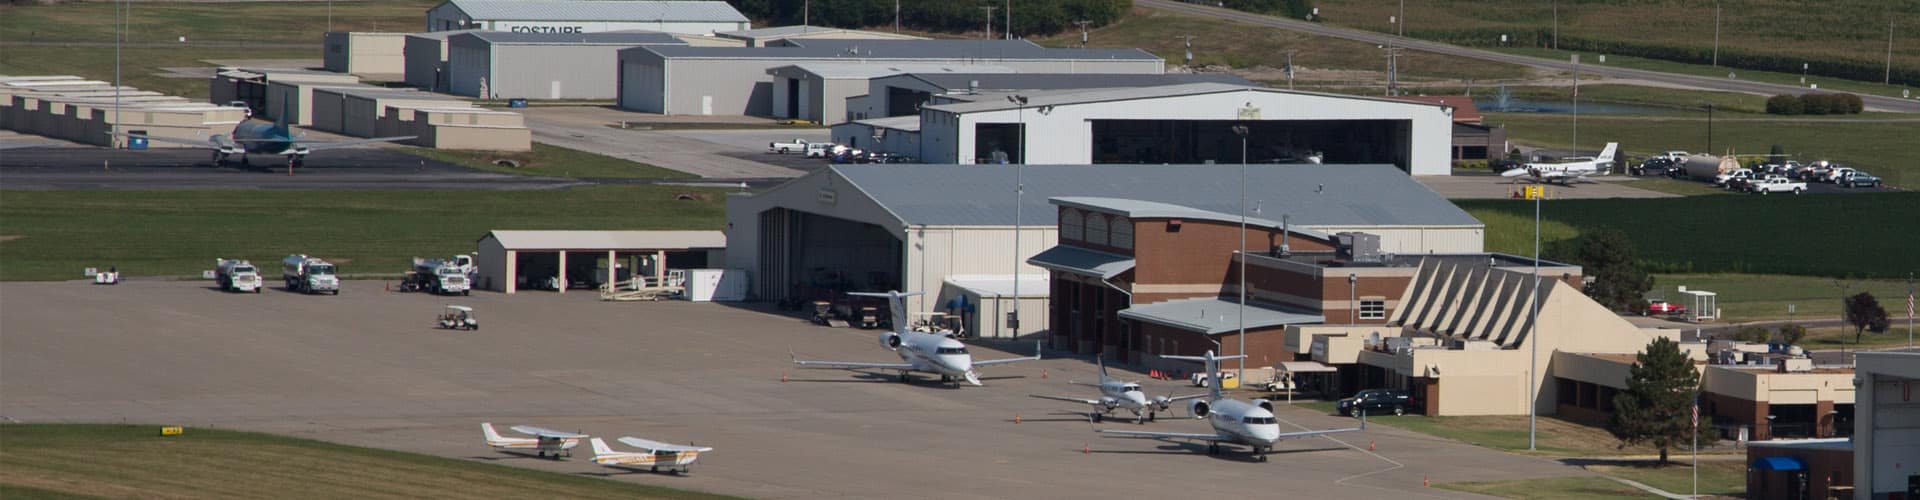 Distant view of the airport hangars